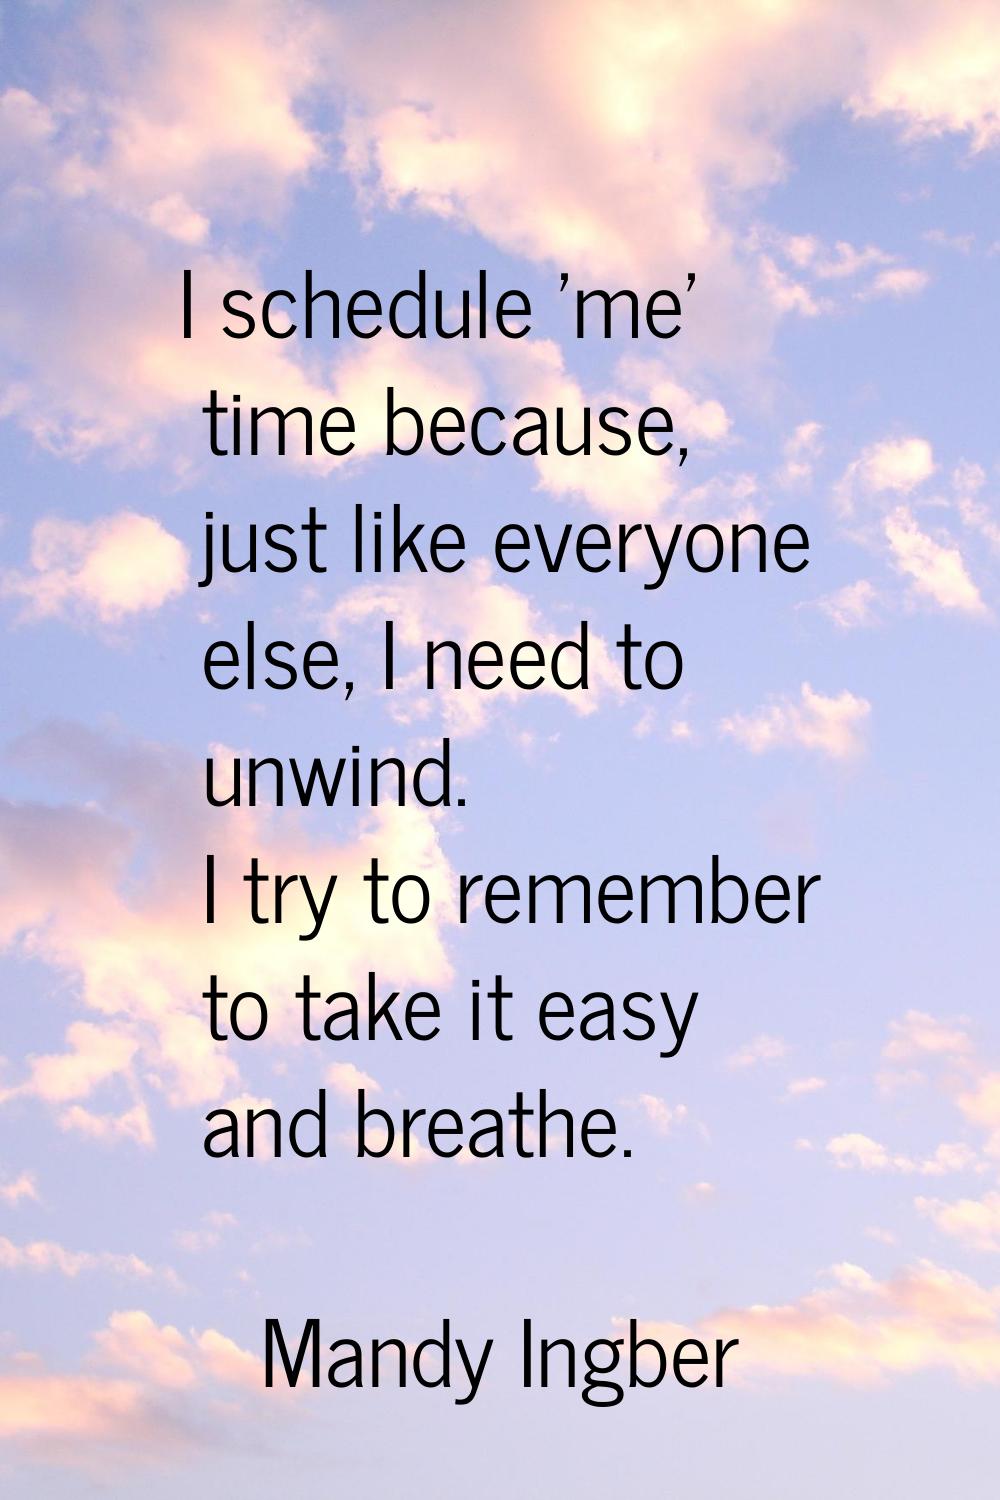 I schedule 'me' time because, just like everyone else, I need to unwind. I try to remember to take 